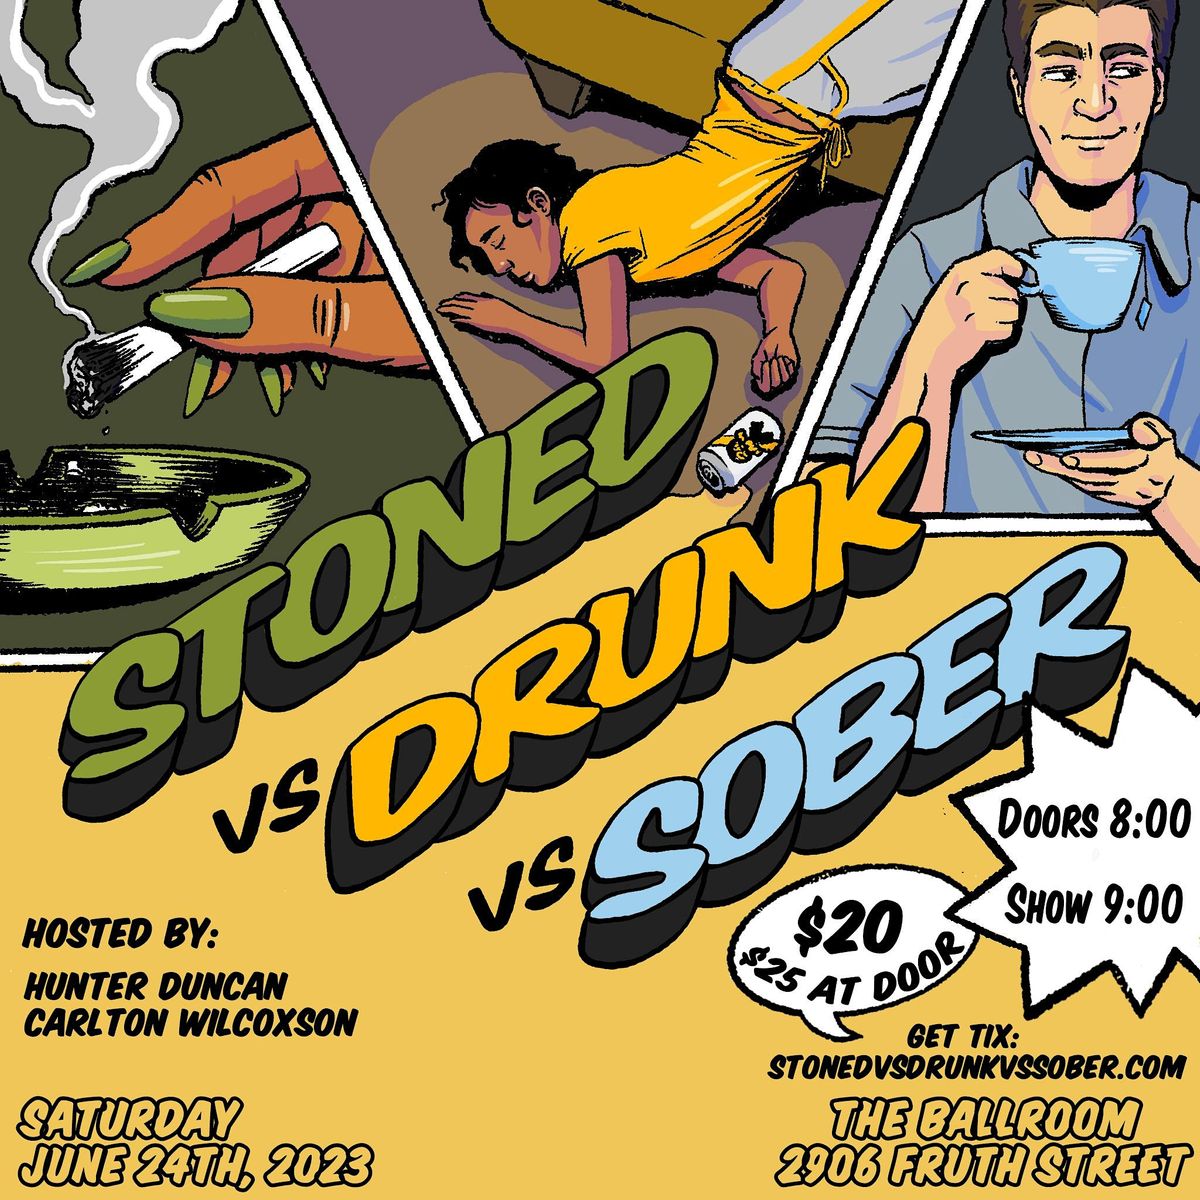 Stoned vs Drunk vs Sober: MAGNIFICENT MAY!